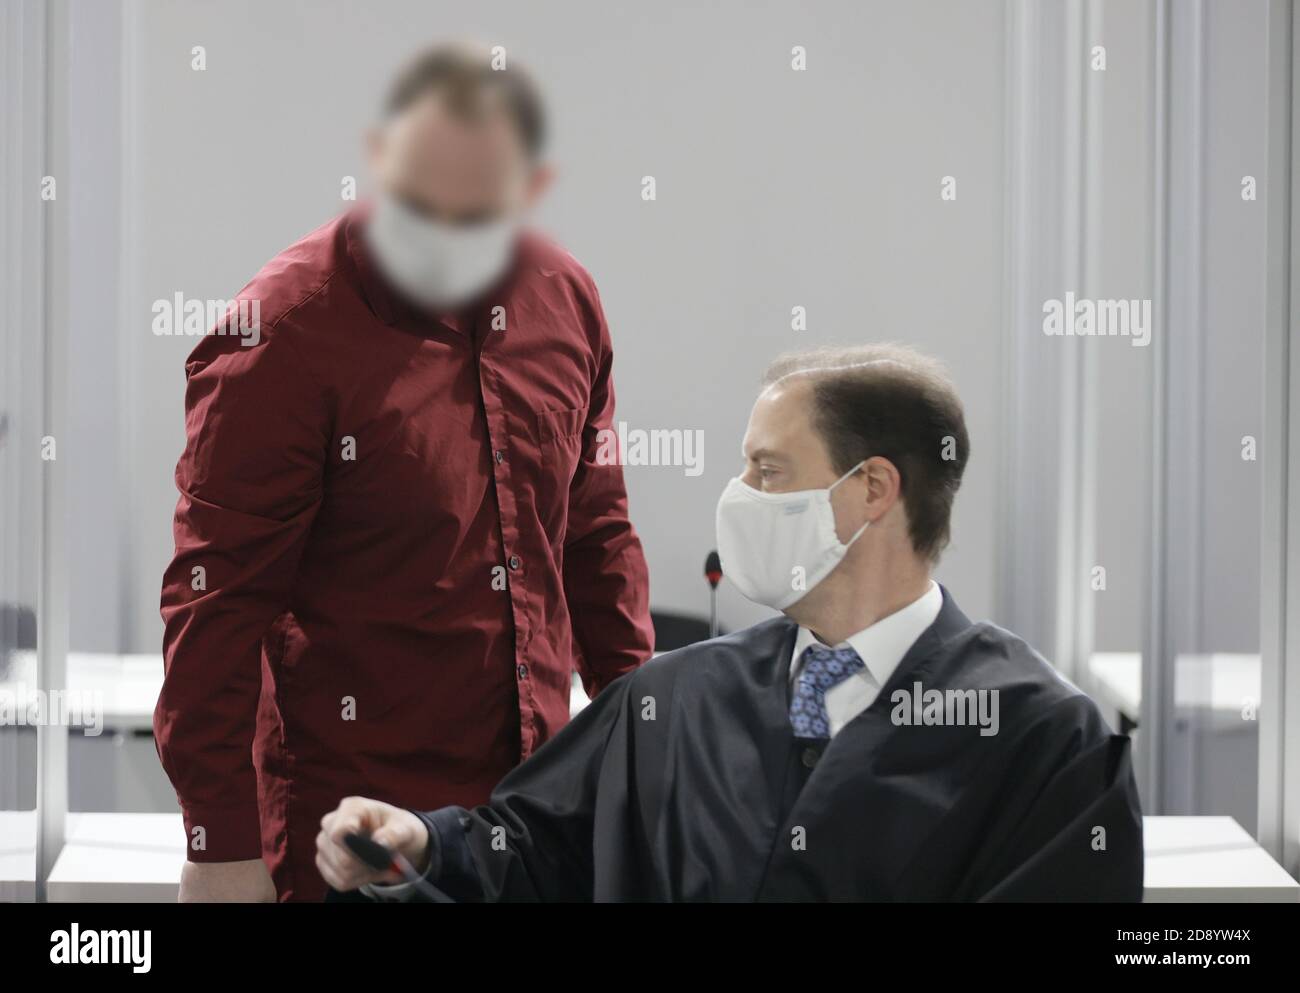 02 November 2020, Hessen, Wiesbaden: The accused stands next to his lawyer Oliver Baars (R) in the courtroom of the regional court during the trial in the abuse complex Bergisch Gladbach. The 39-year-old defendant is accused of having sexually abused his biological children, including an infant and a stepchild, and of having sent pictures of the crimes via chat groups. Investigations into the case had begun after searches of a 43-year-old family man in Bergisch Gladbach, North Rhine-Westphalia, in autumn 2019. Photo: Ronald Wittek/EPA-Pool/dpa - ATTENTION: The employees of the Regional Court o Stock Photo